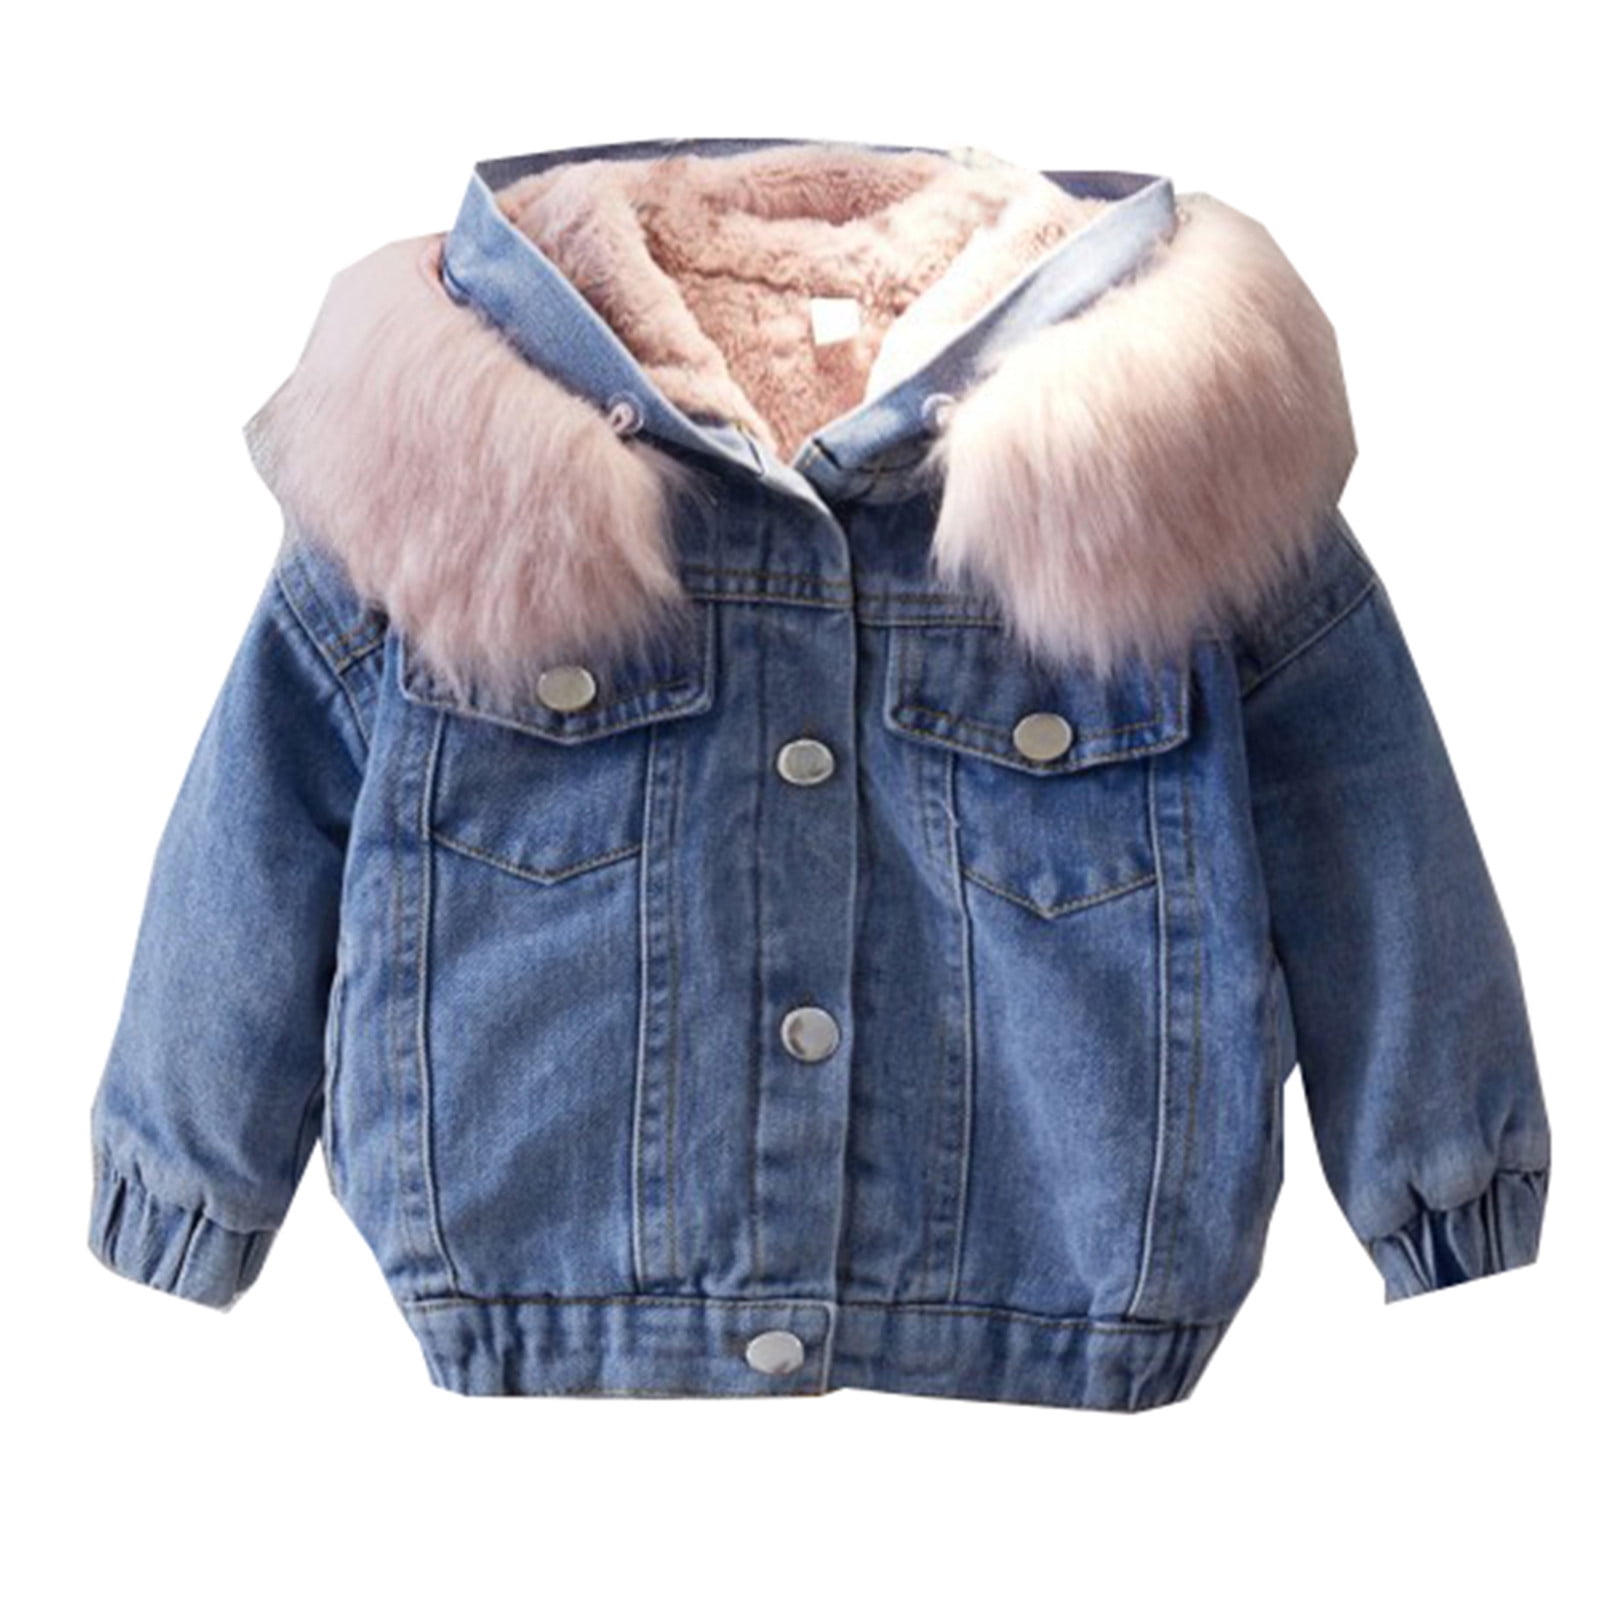 Jackets for Boys Size 14-16 Toddler Winter Jackets 4t Toddler